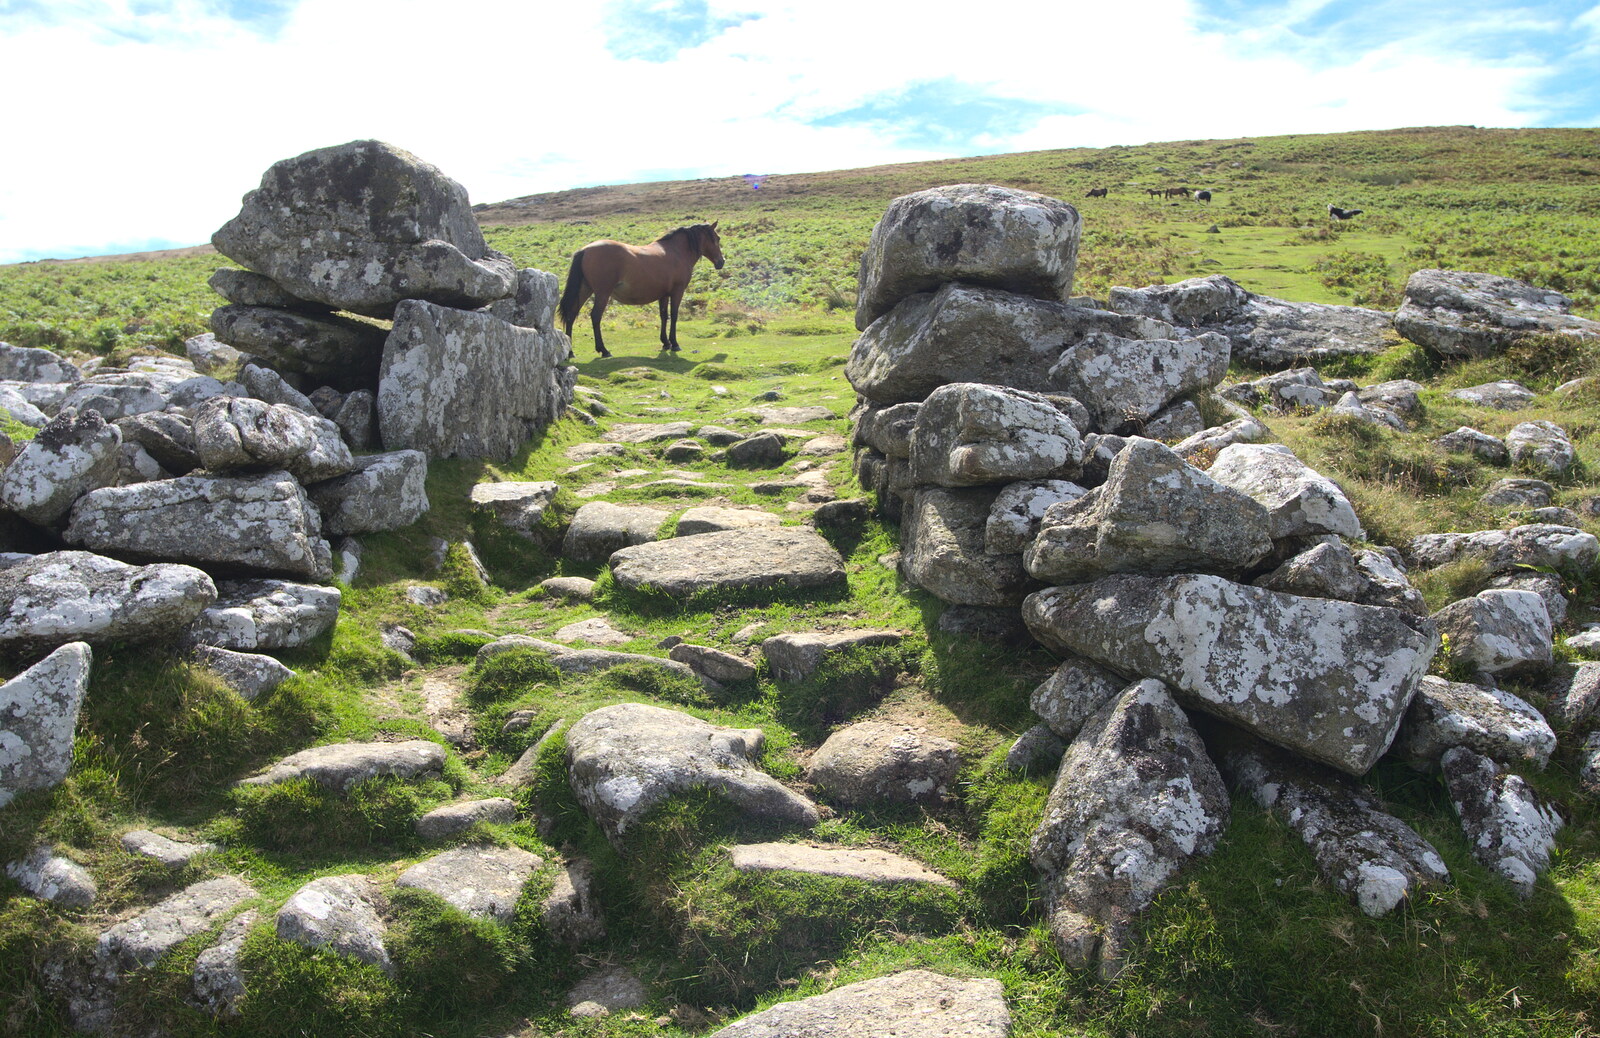 A pony by the settlement entrance from Badger's Holt and Bronze-Age Grimspound, Dartmoor, Devon - 10th August 2016